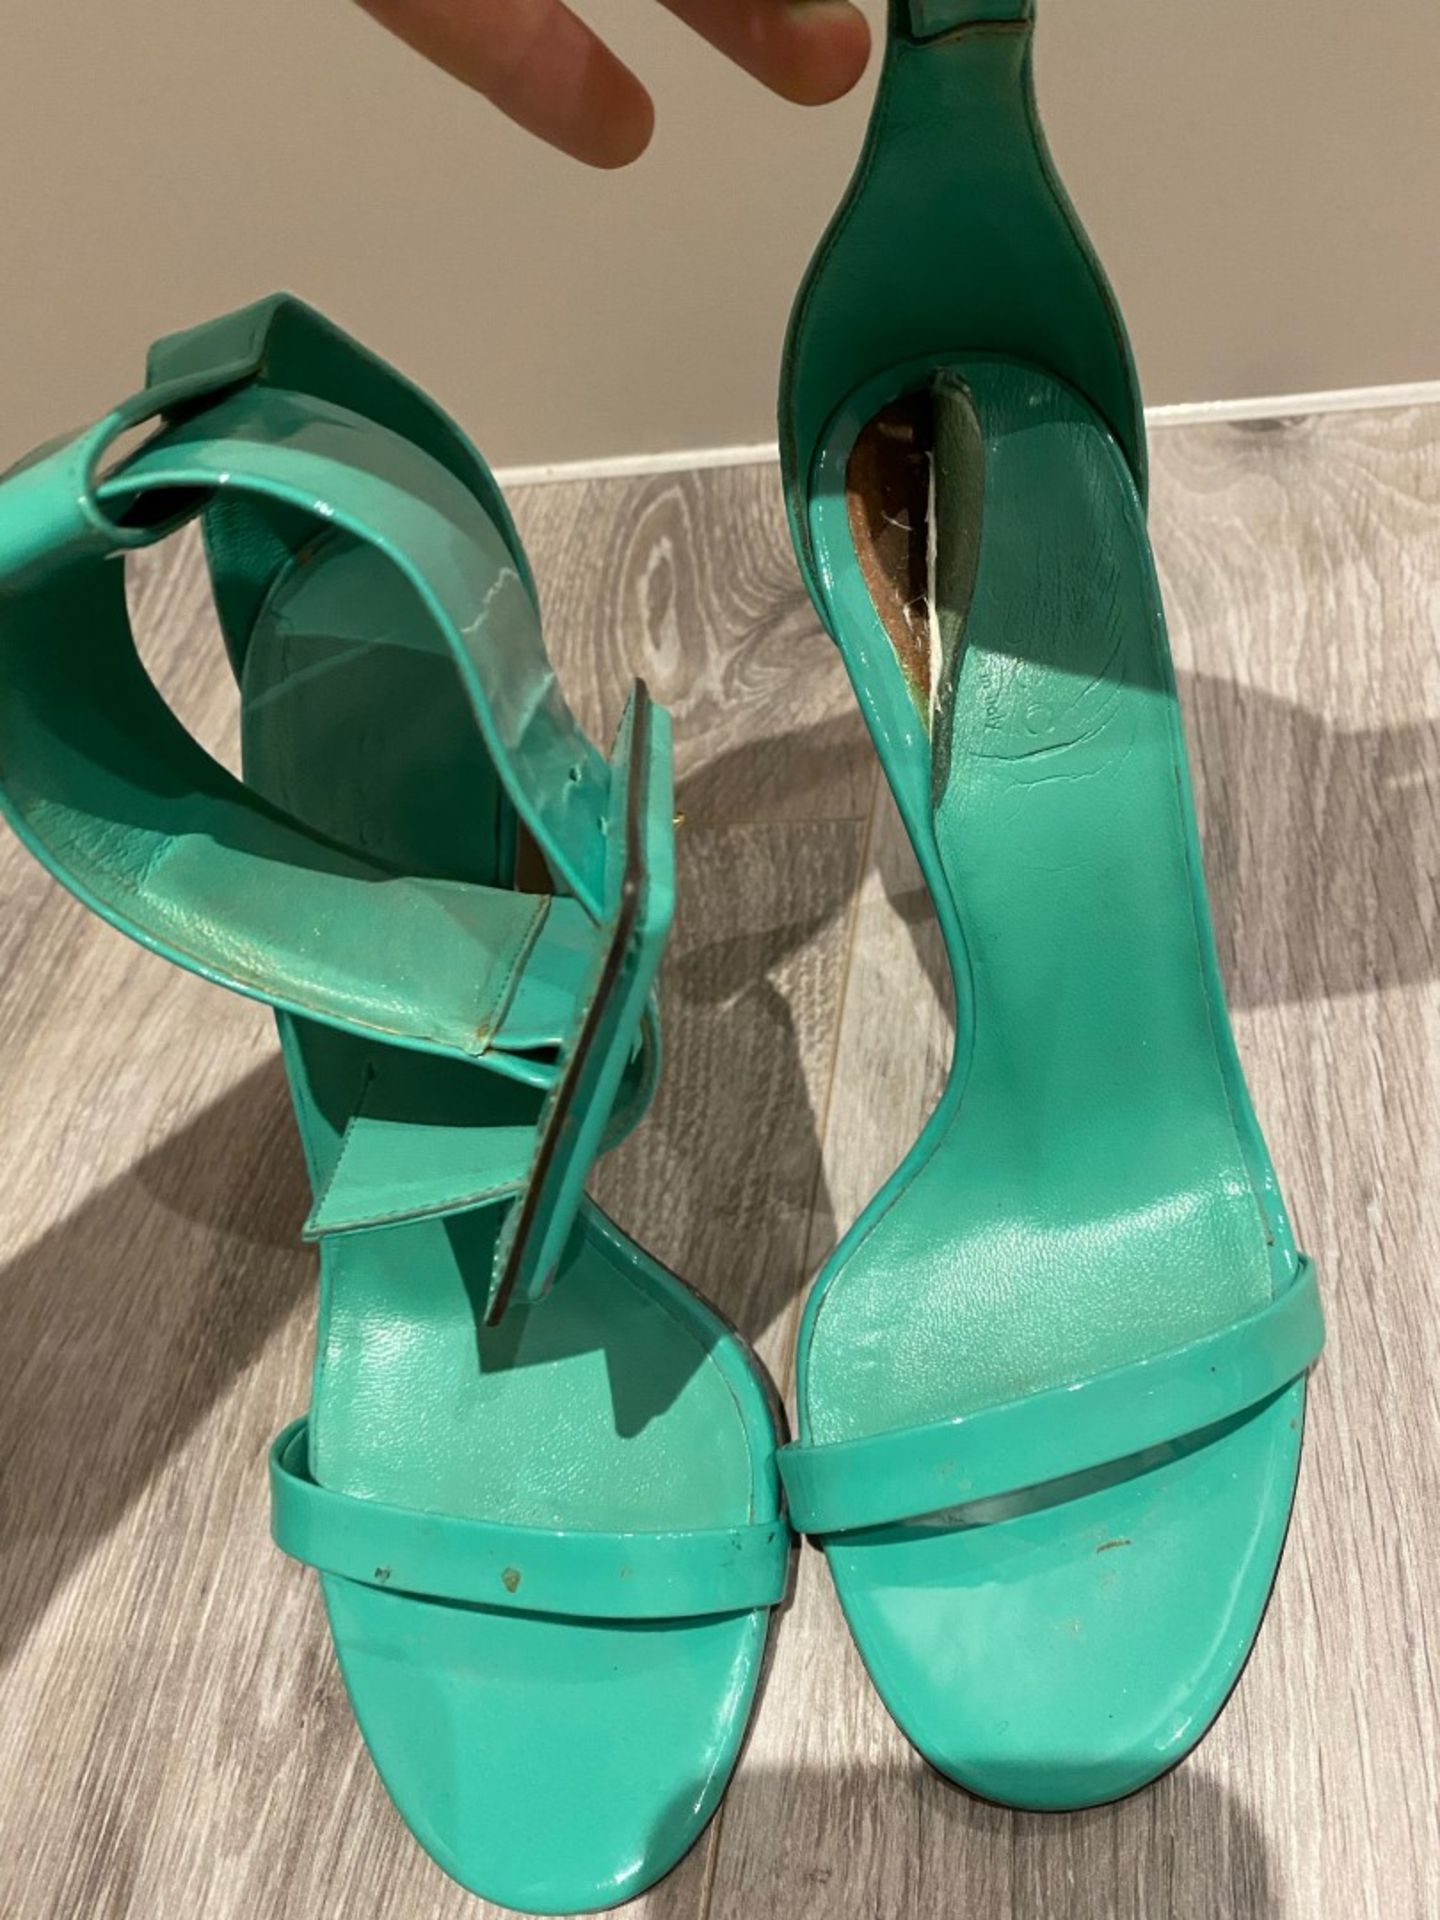 1 x Pair Of Genuine Gucci High Heel Shoes In Green - Size: 36 - Preowned in Worn Condition - Ref: LO - Image 4 of 4